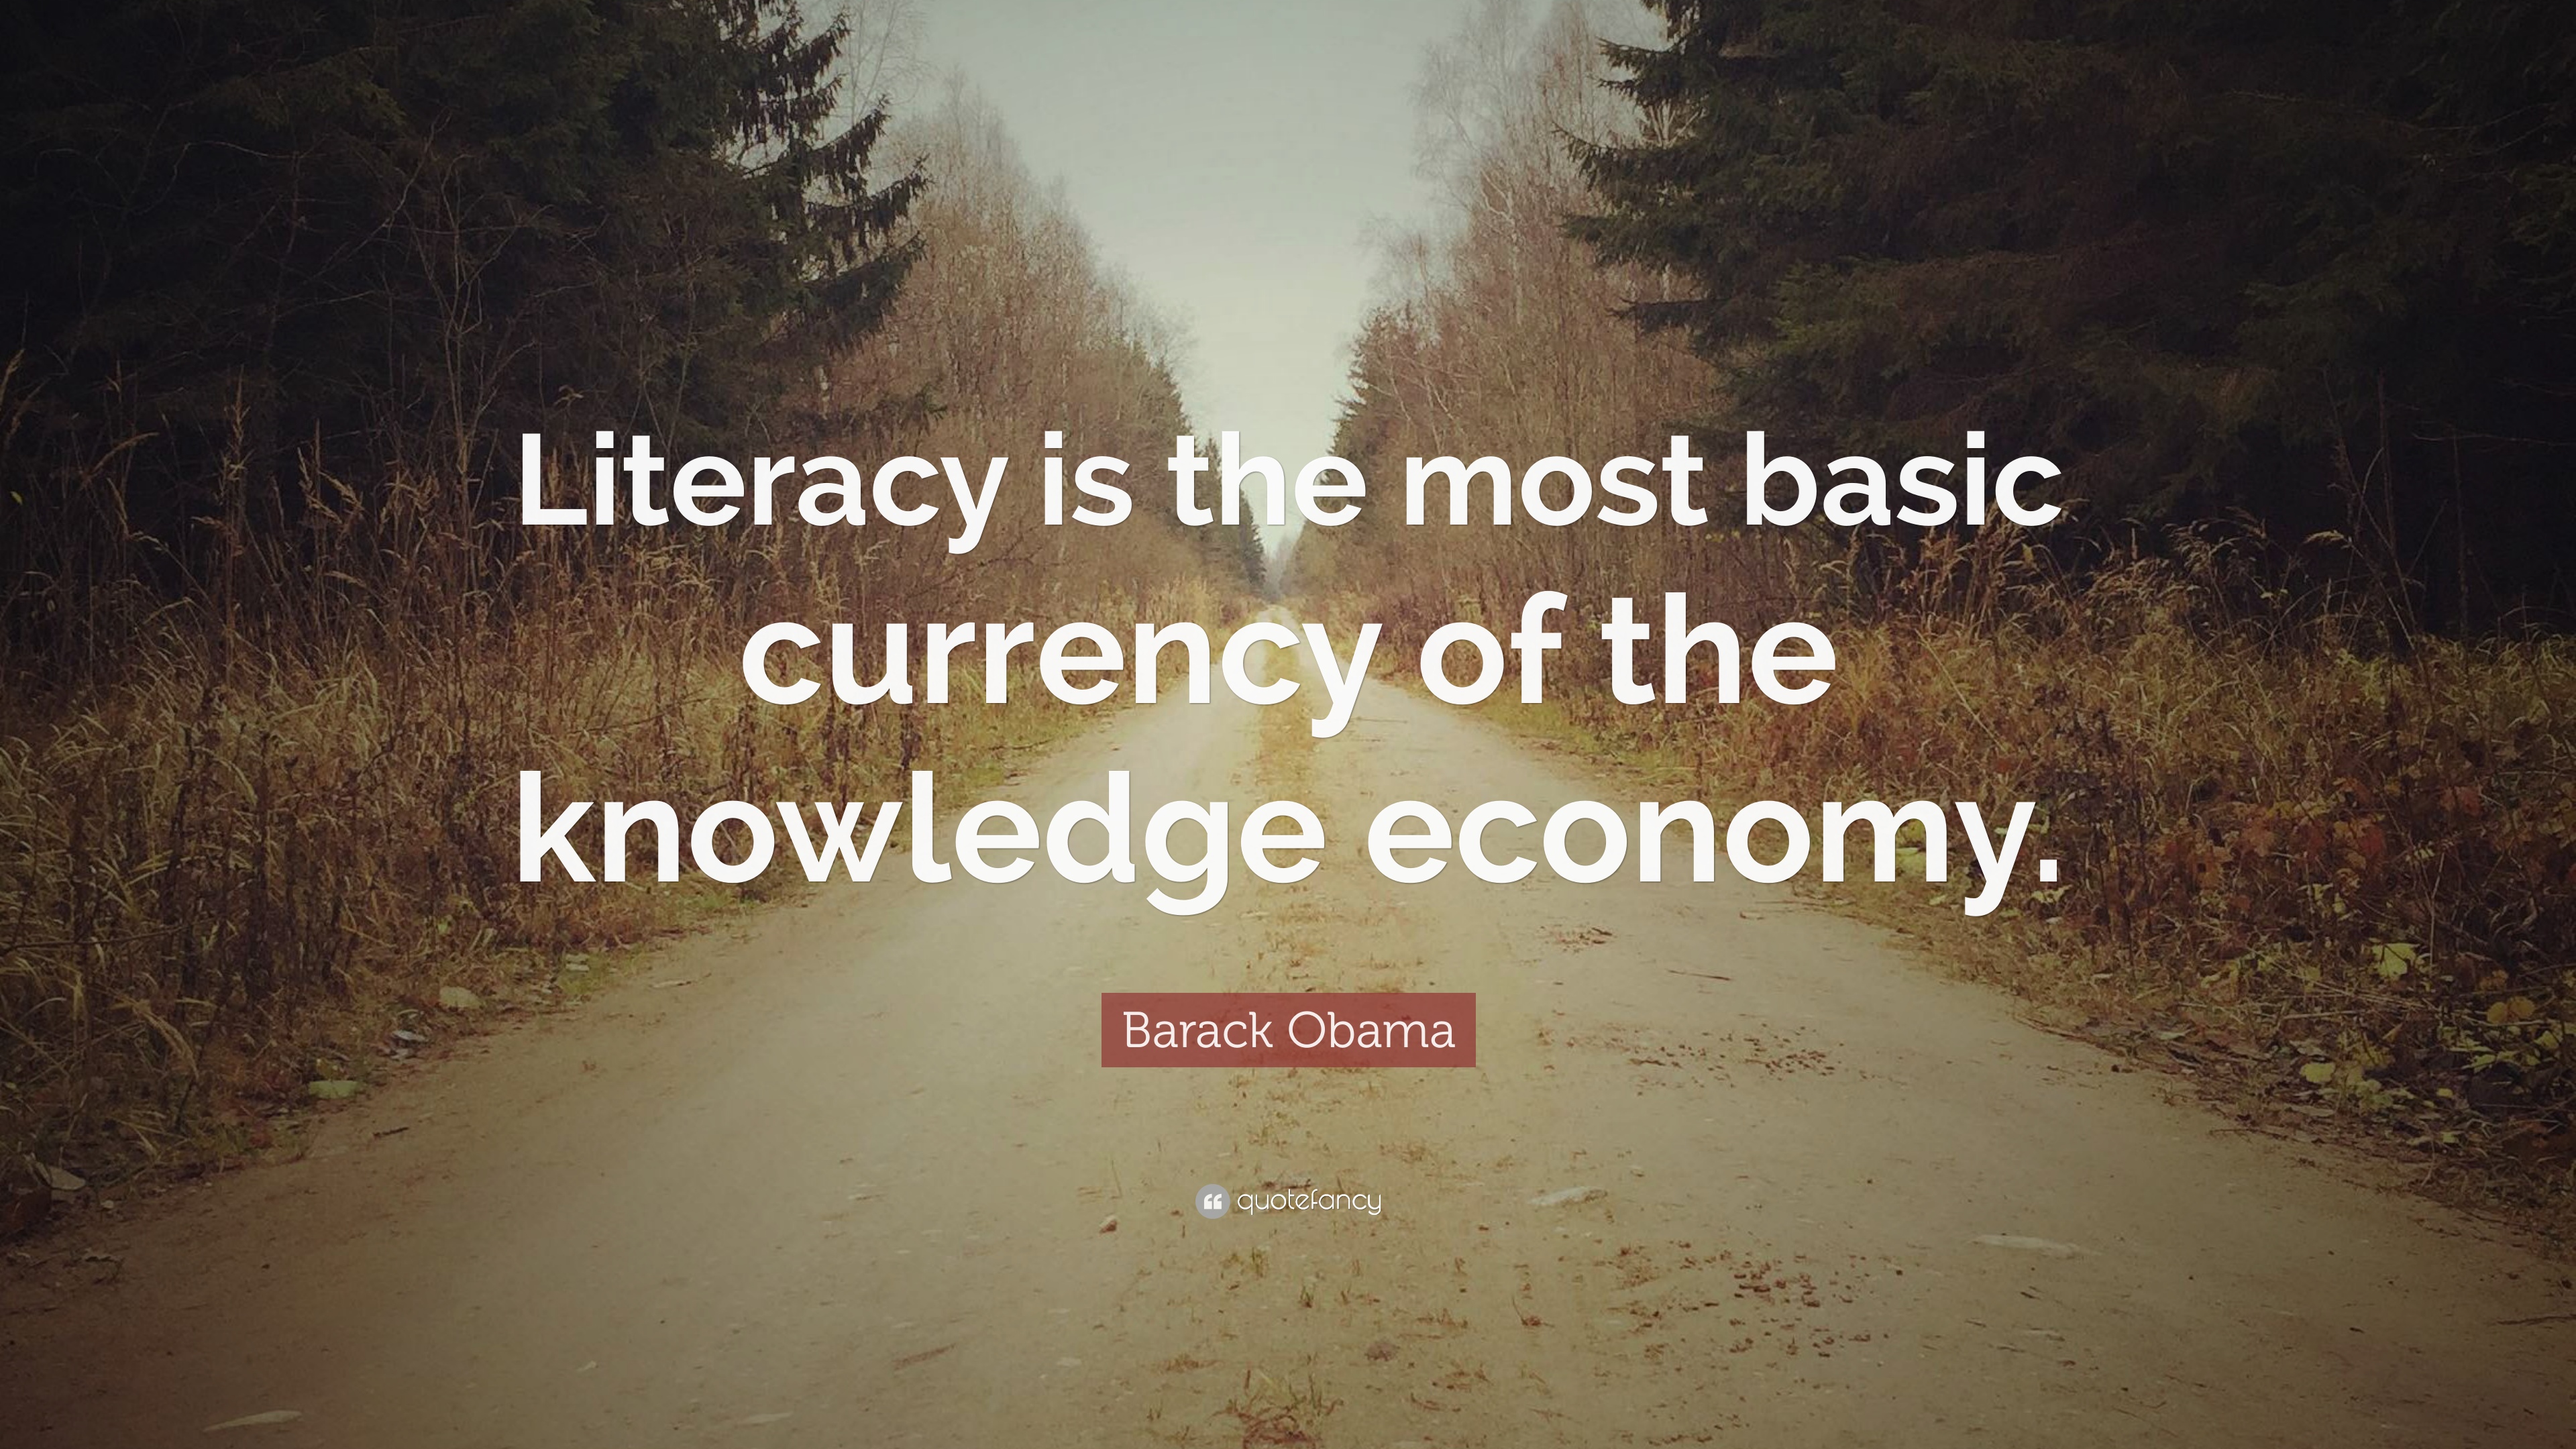 Barack Obama Quote: “Literacy is the most basic currency